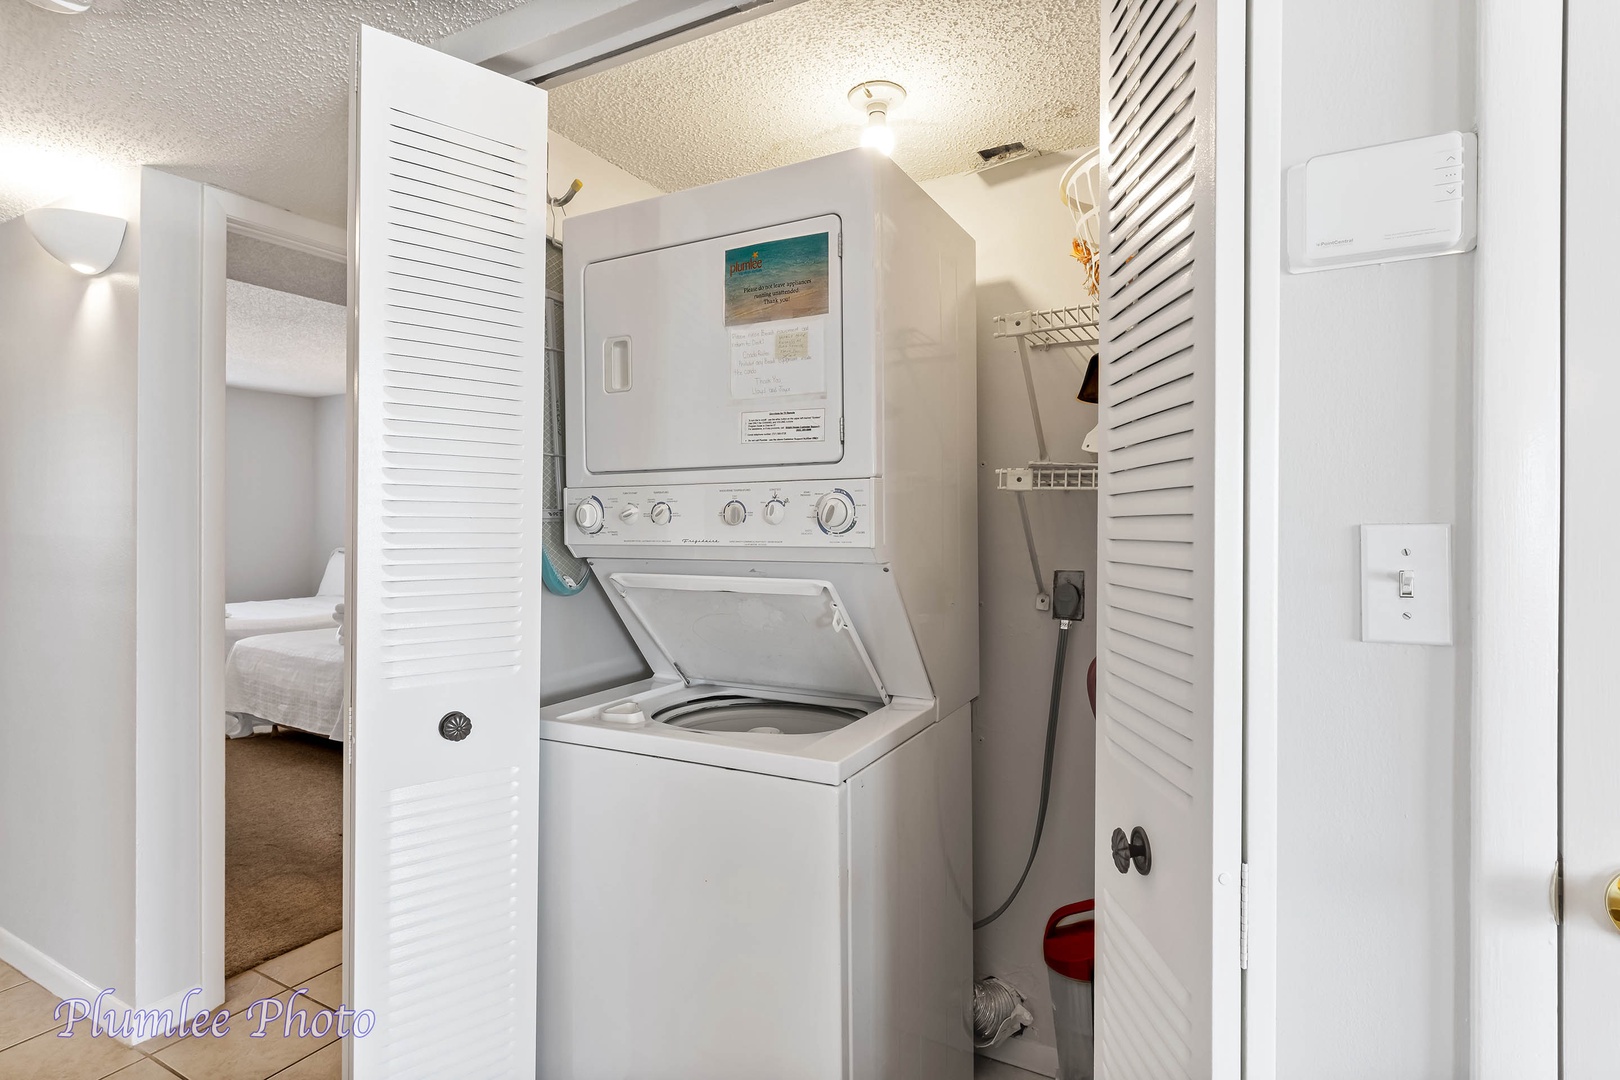 Washer and dryer right in the condo